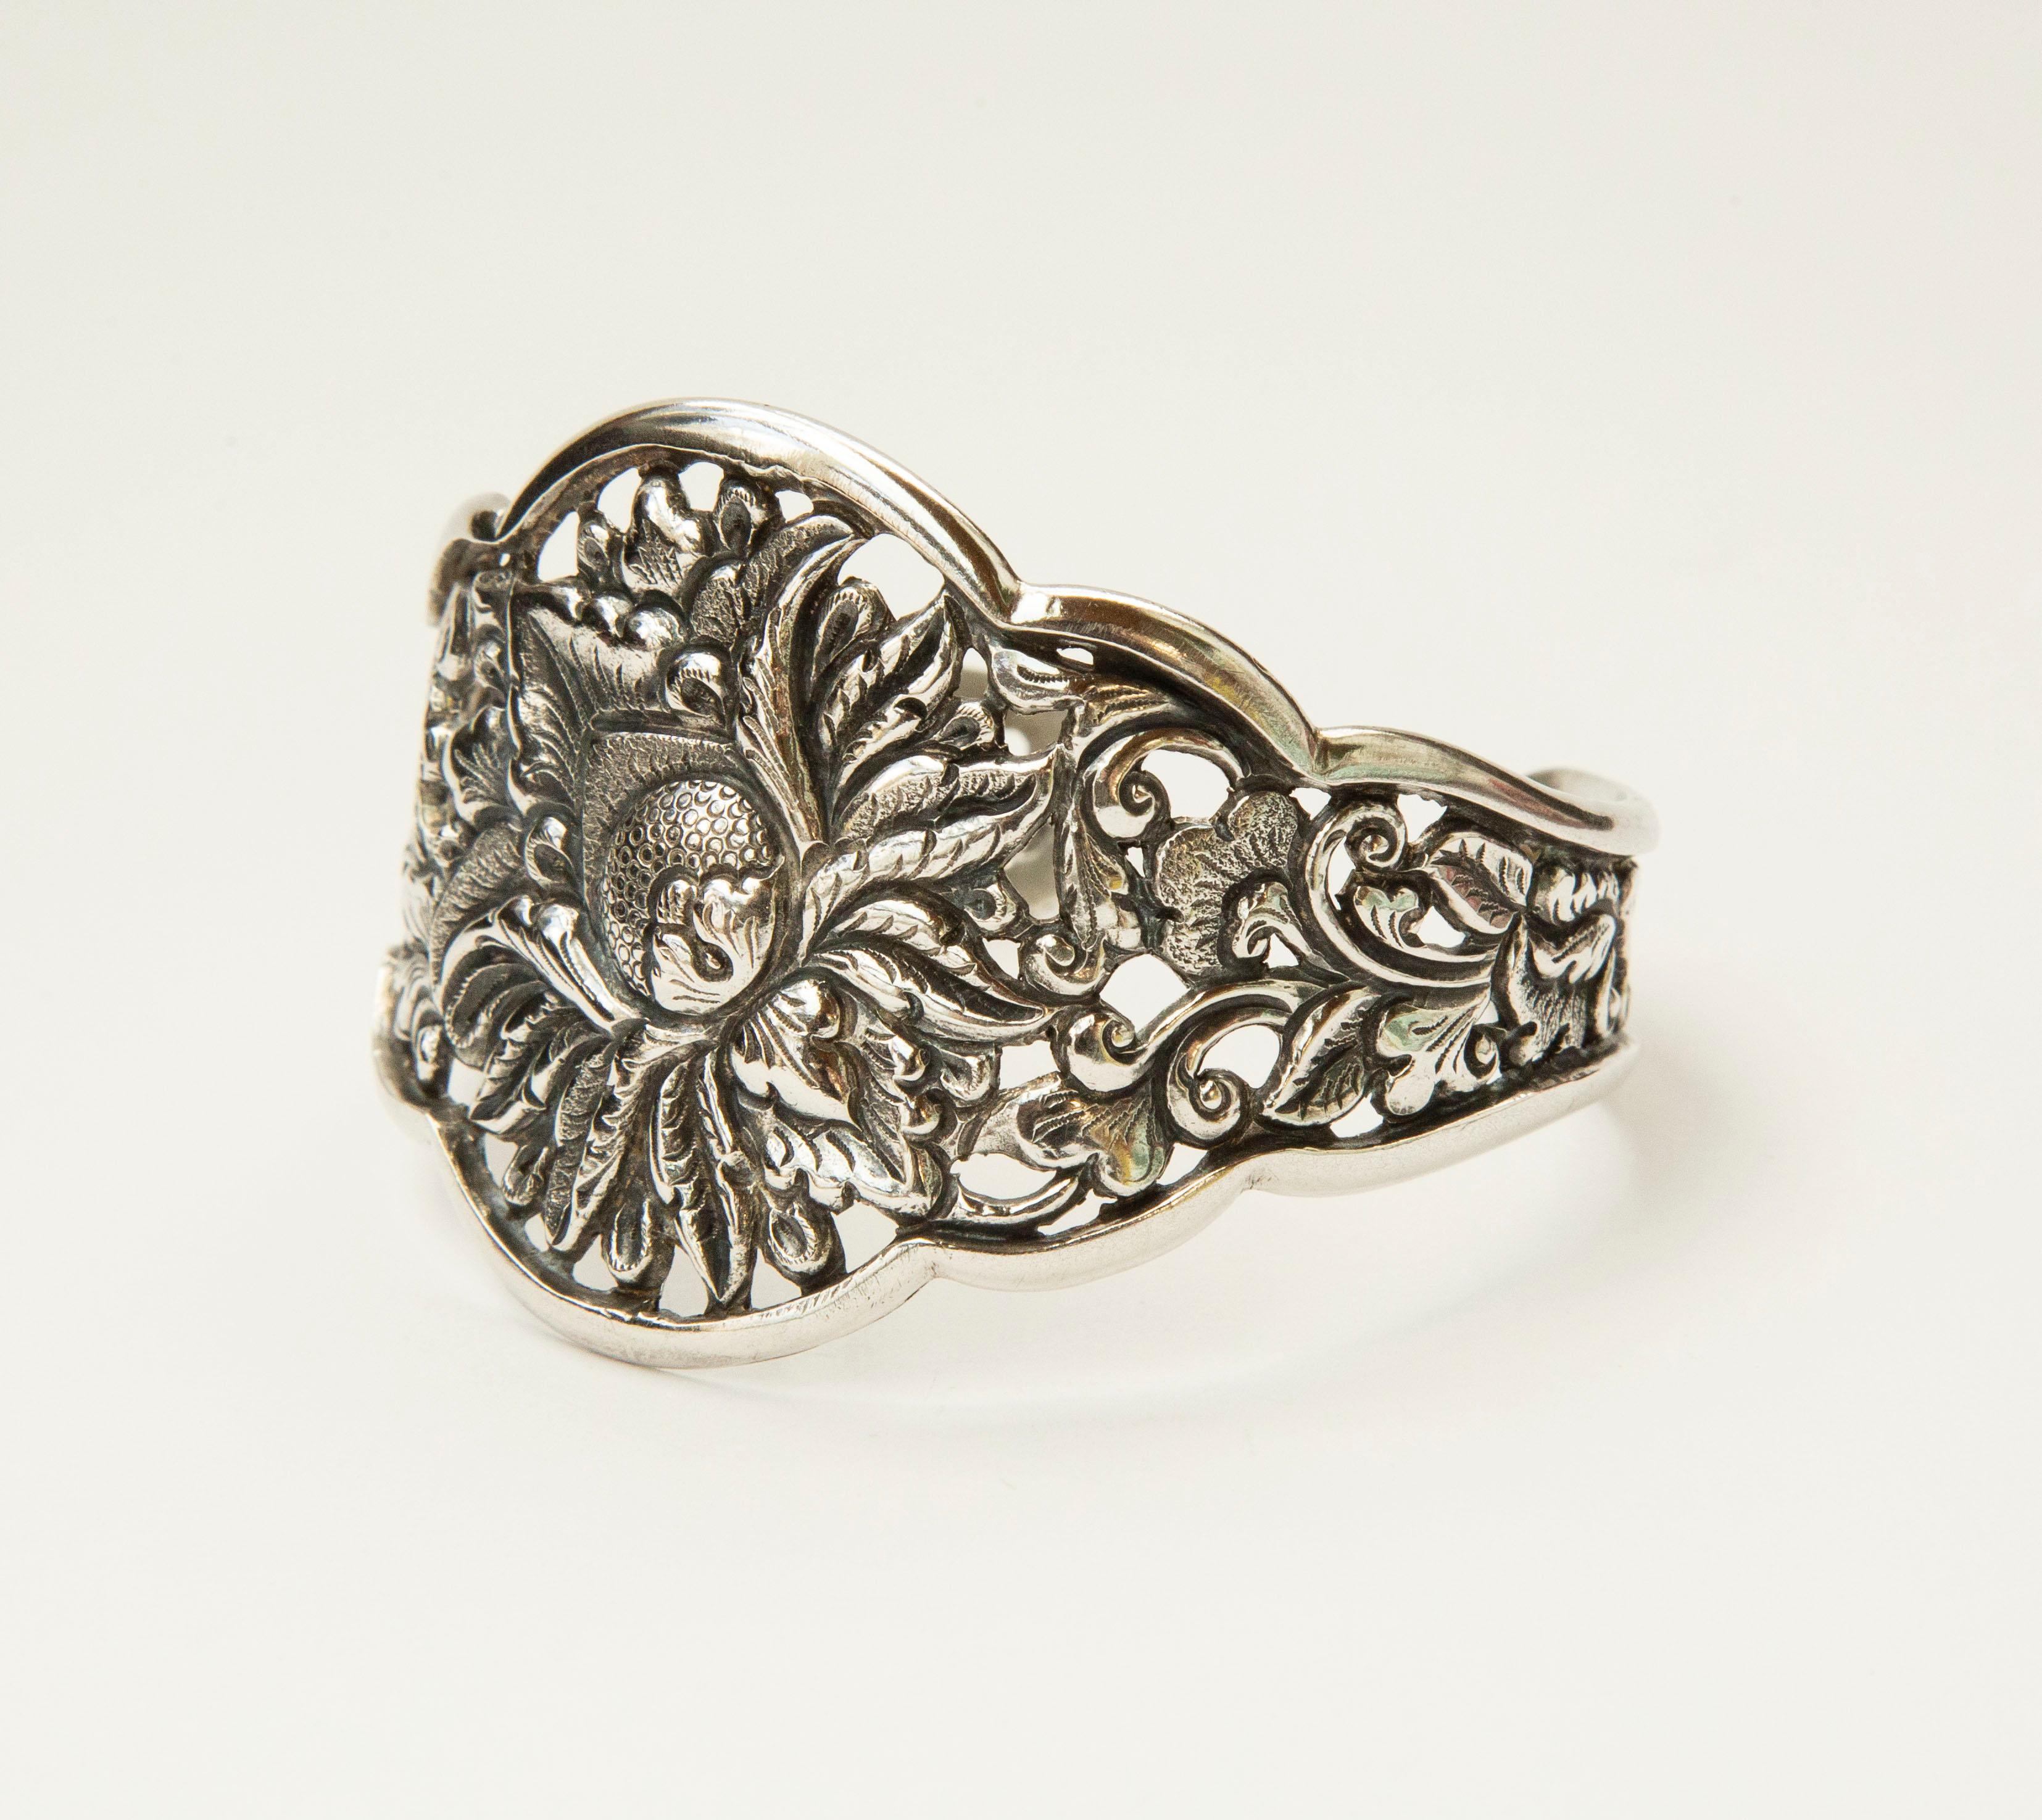 Vintage Indonesian Silver 800 Cuff Bracelet with Floral Decor CA. 1930s In Good Condition For Sale In Arnhem, NL